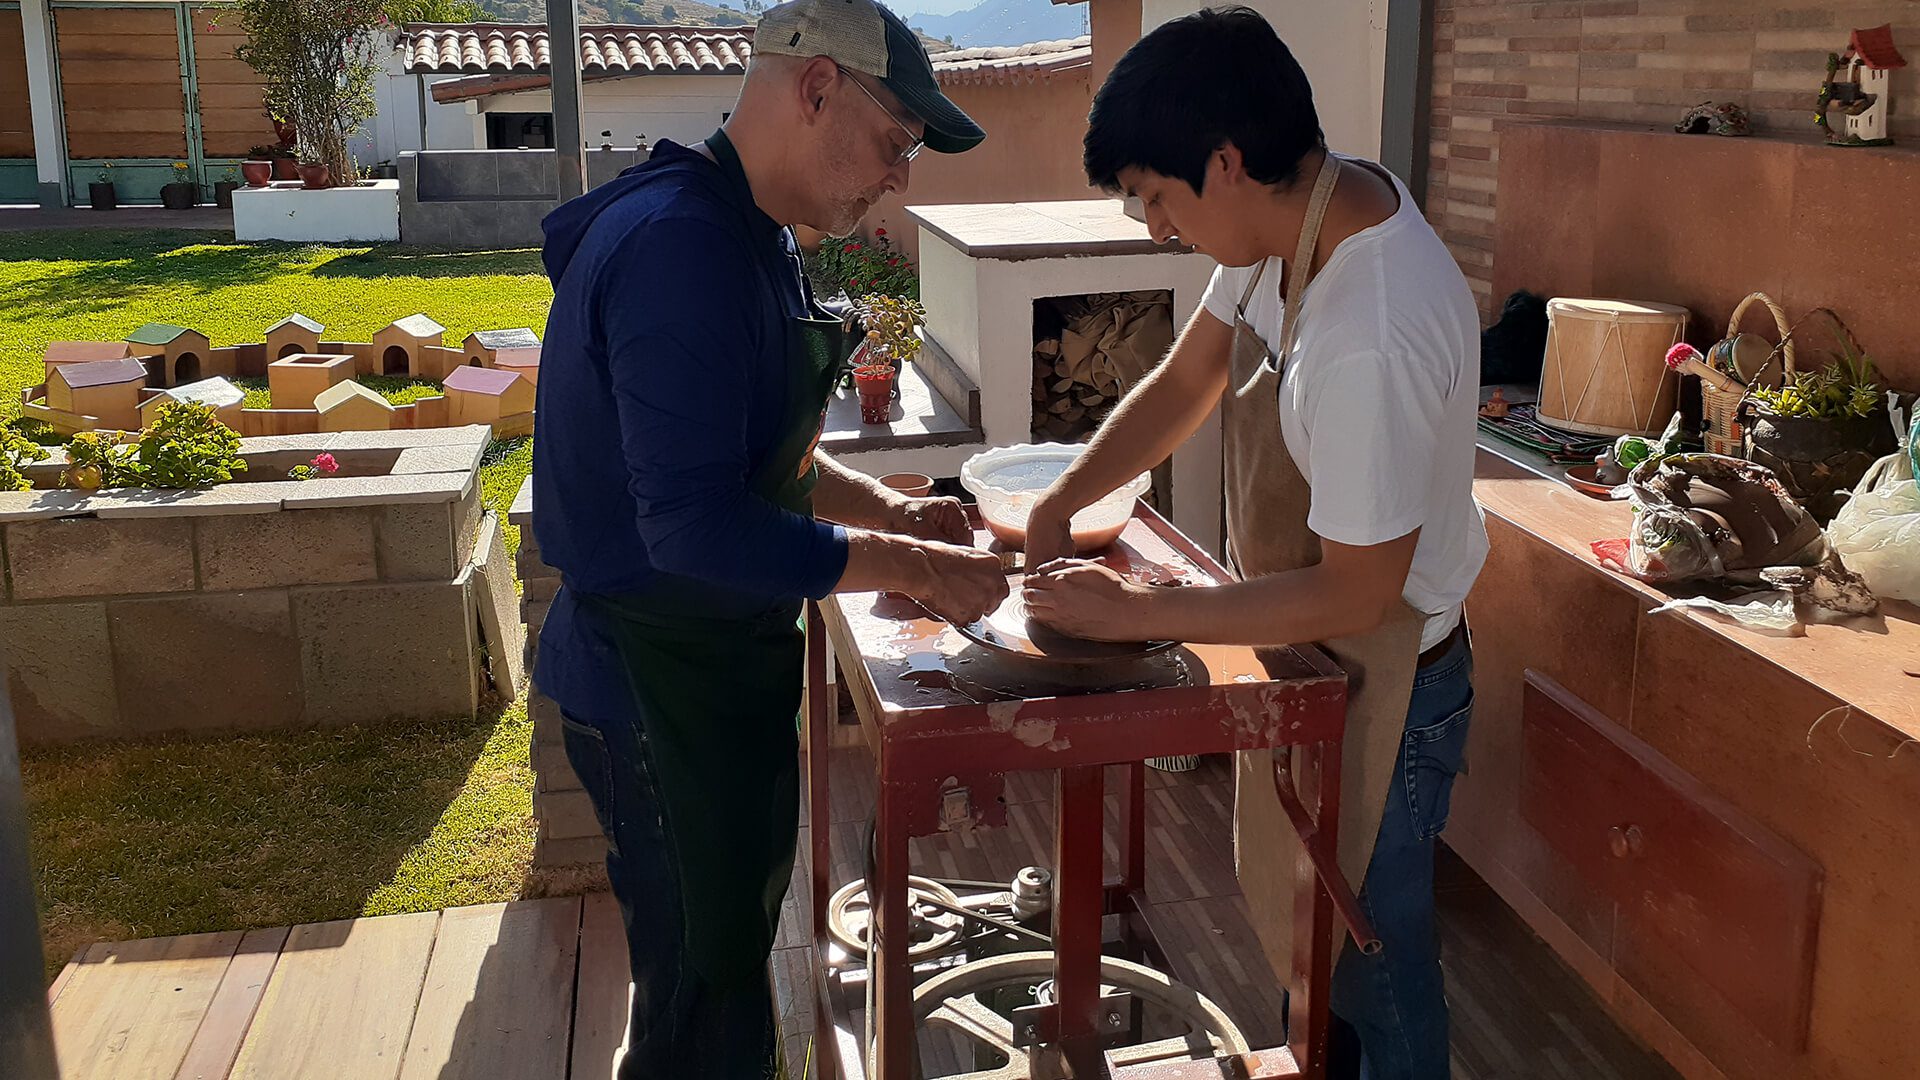 The initial phase of the ceramic workshop starts with the use of the turnstile - RESPONSible Travel Peru